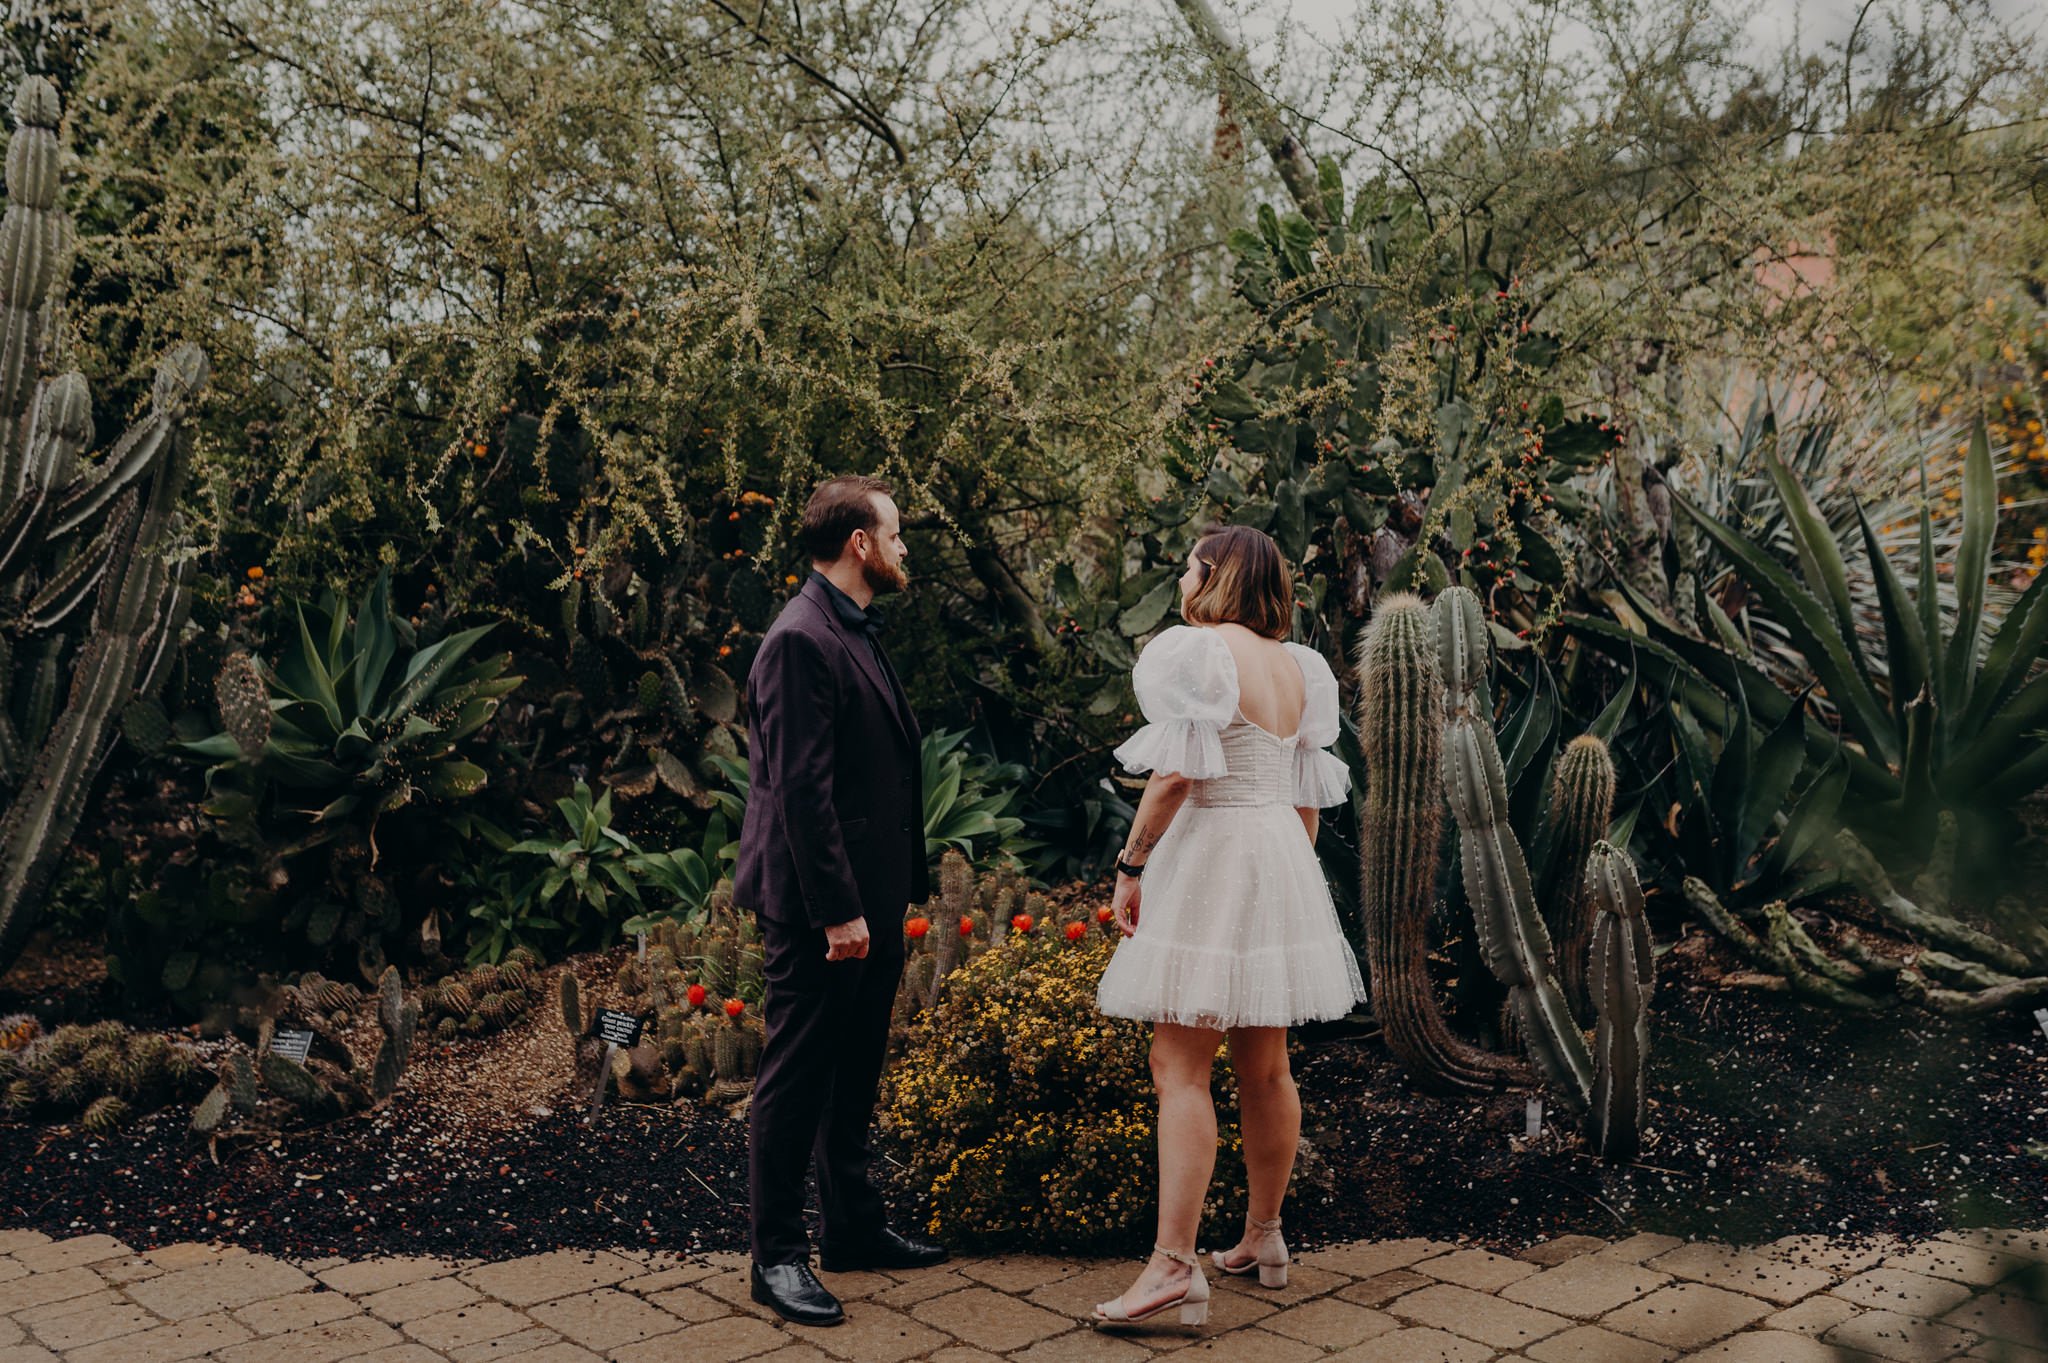 queer wedding photographers in los angeles - candid engagement session - itlaphoto.com-36.jpg